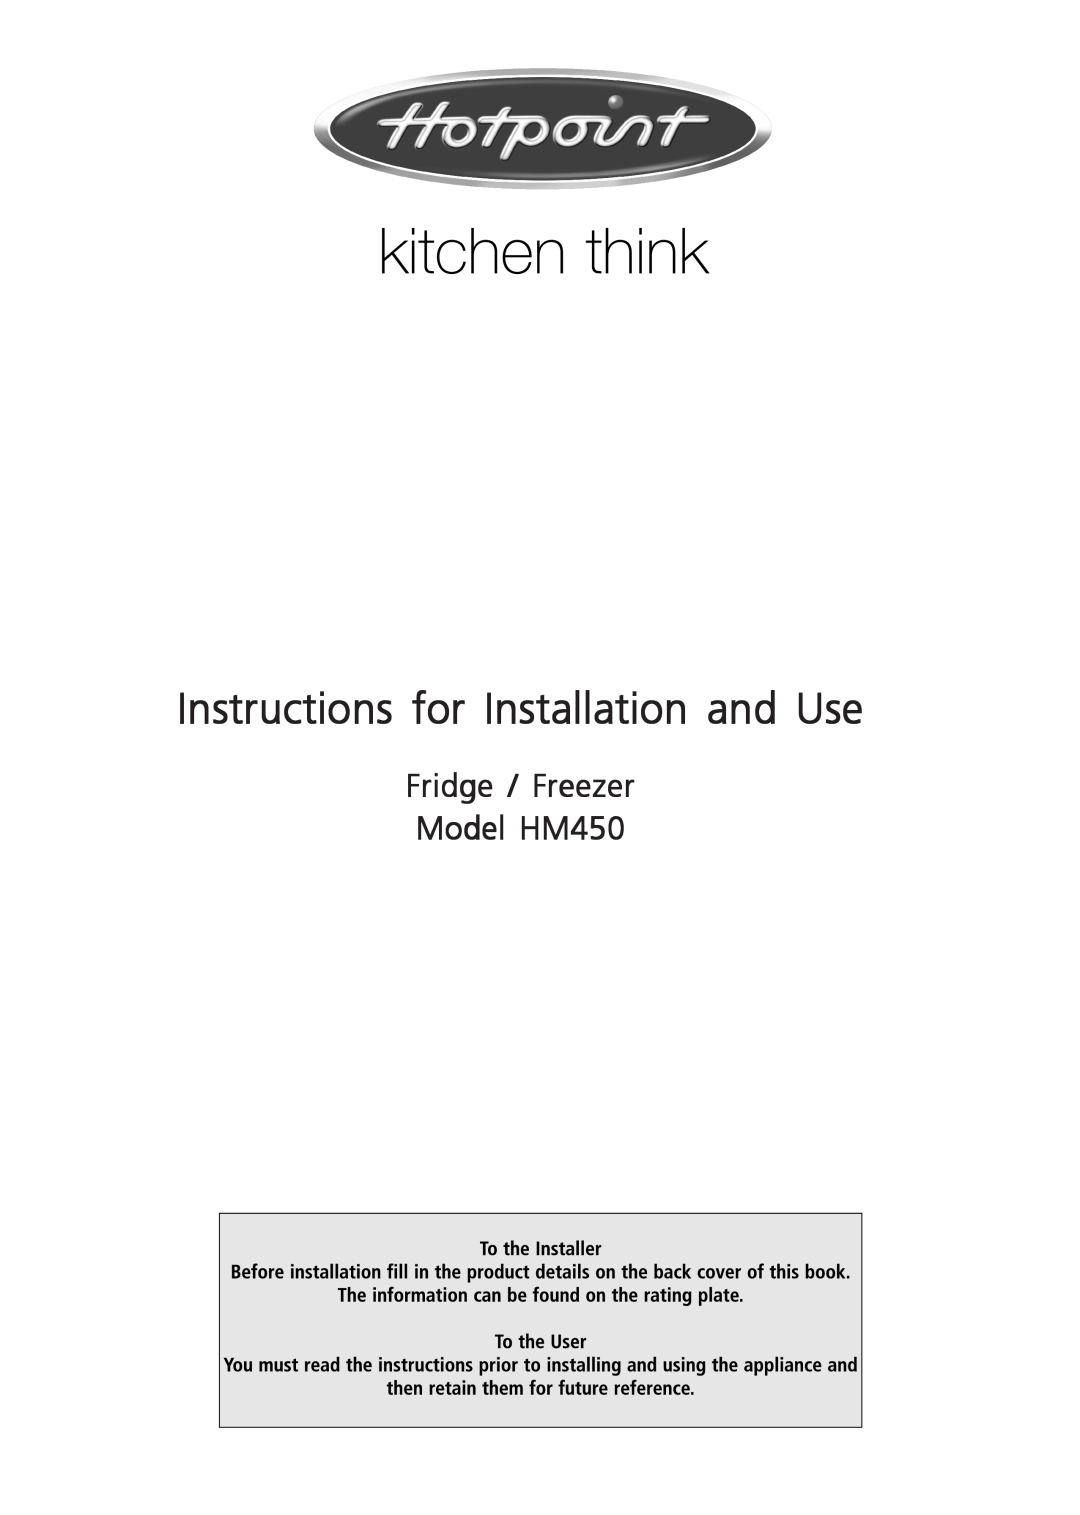 Hotpoint manual Instructions for Installation and Use, Fridge / Freezer Model HM450 